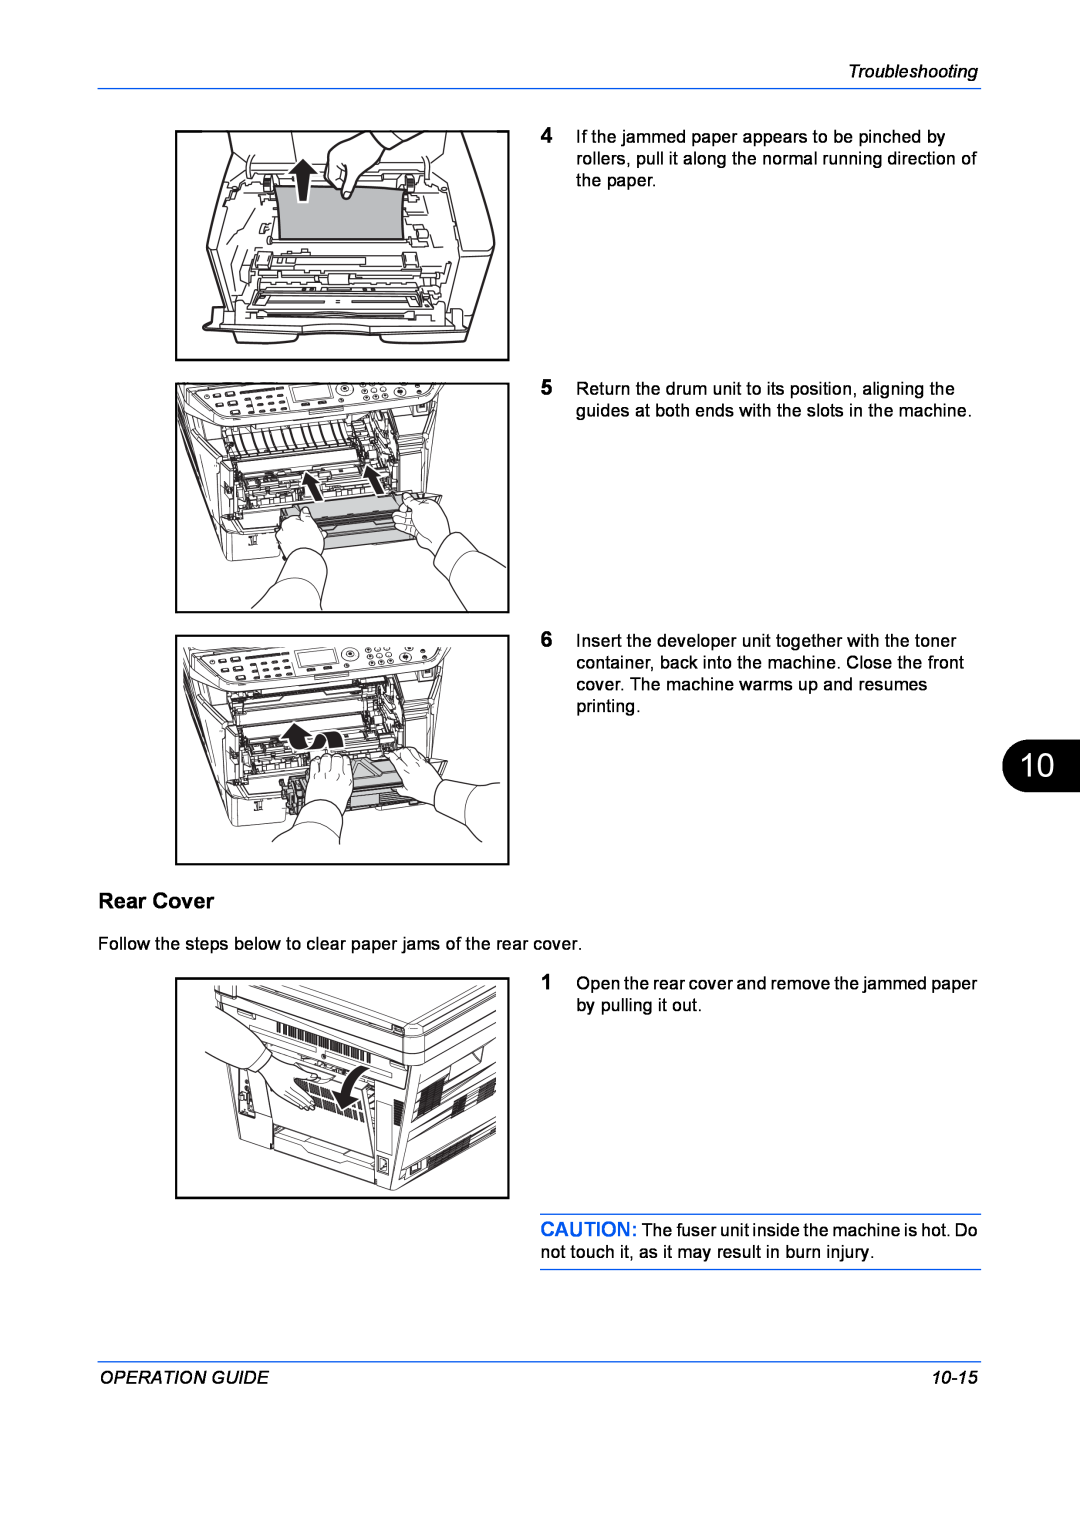 Kyocera FS-1128MFP, FS-1028MFP manual Rear Cover, Troubleshooting, Operation Guide, 10-15 